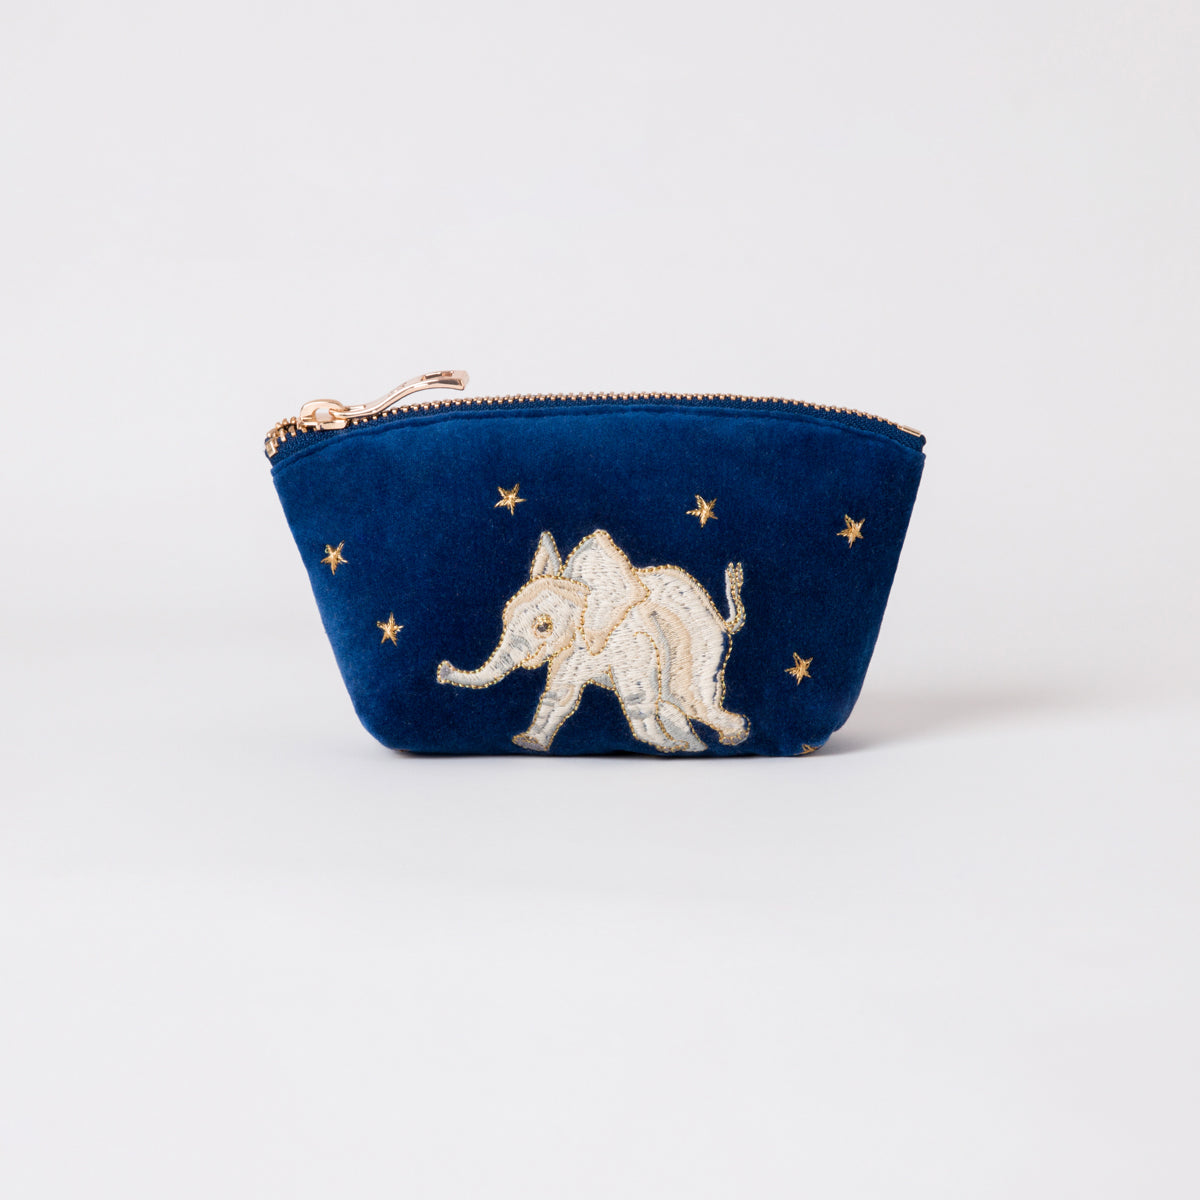 Baby Elephant Conservation Coin Purse